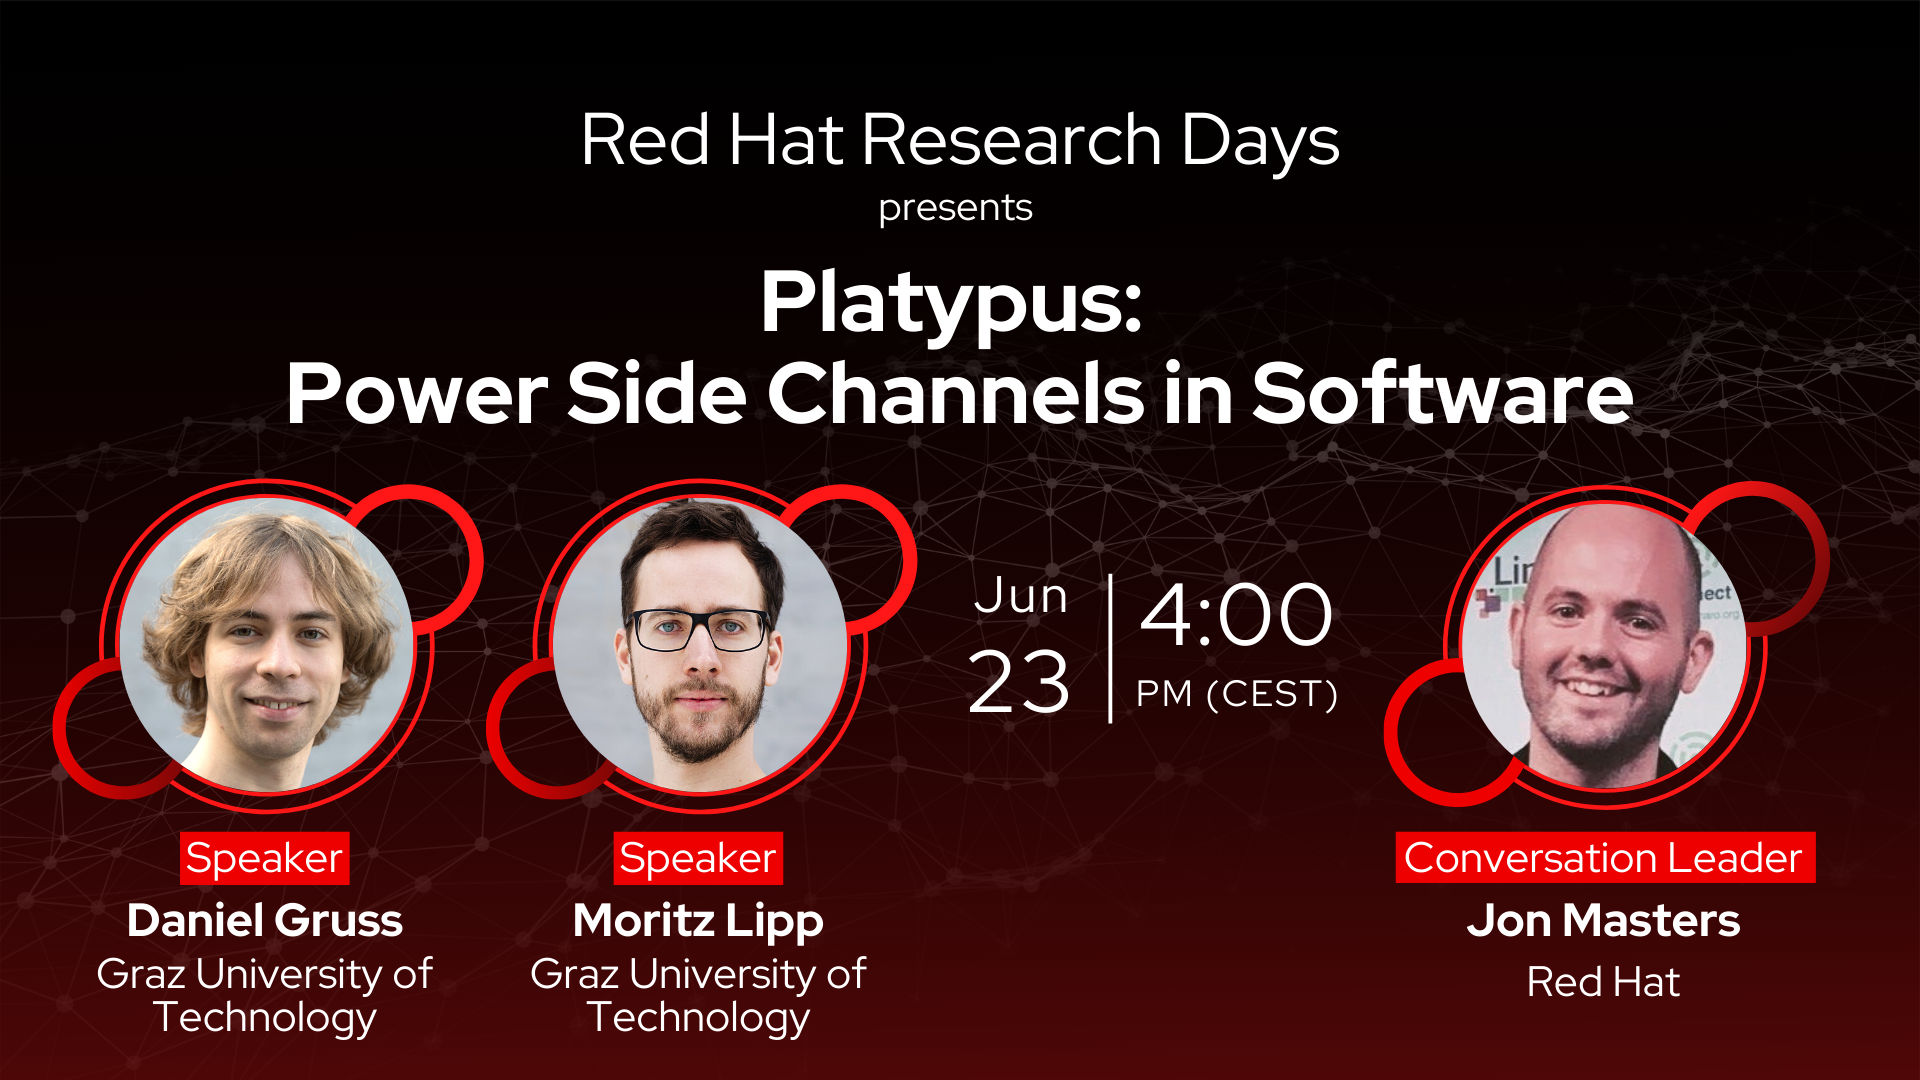 Red Hat Research Days 2021 main banner with speakers profiles and event details